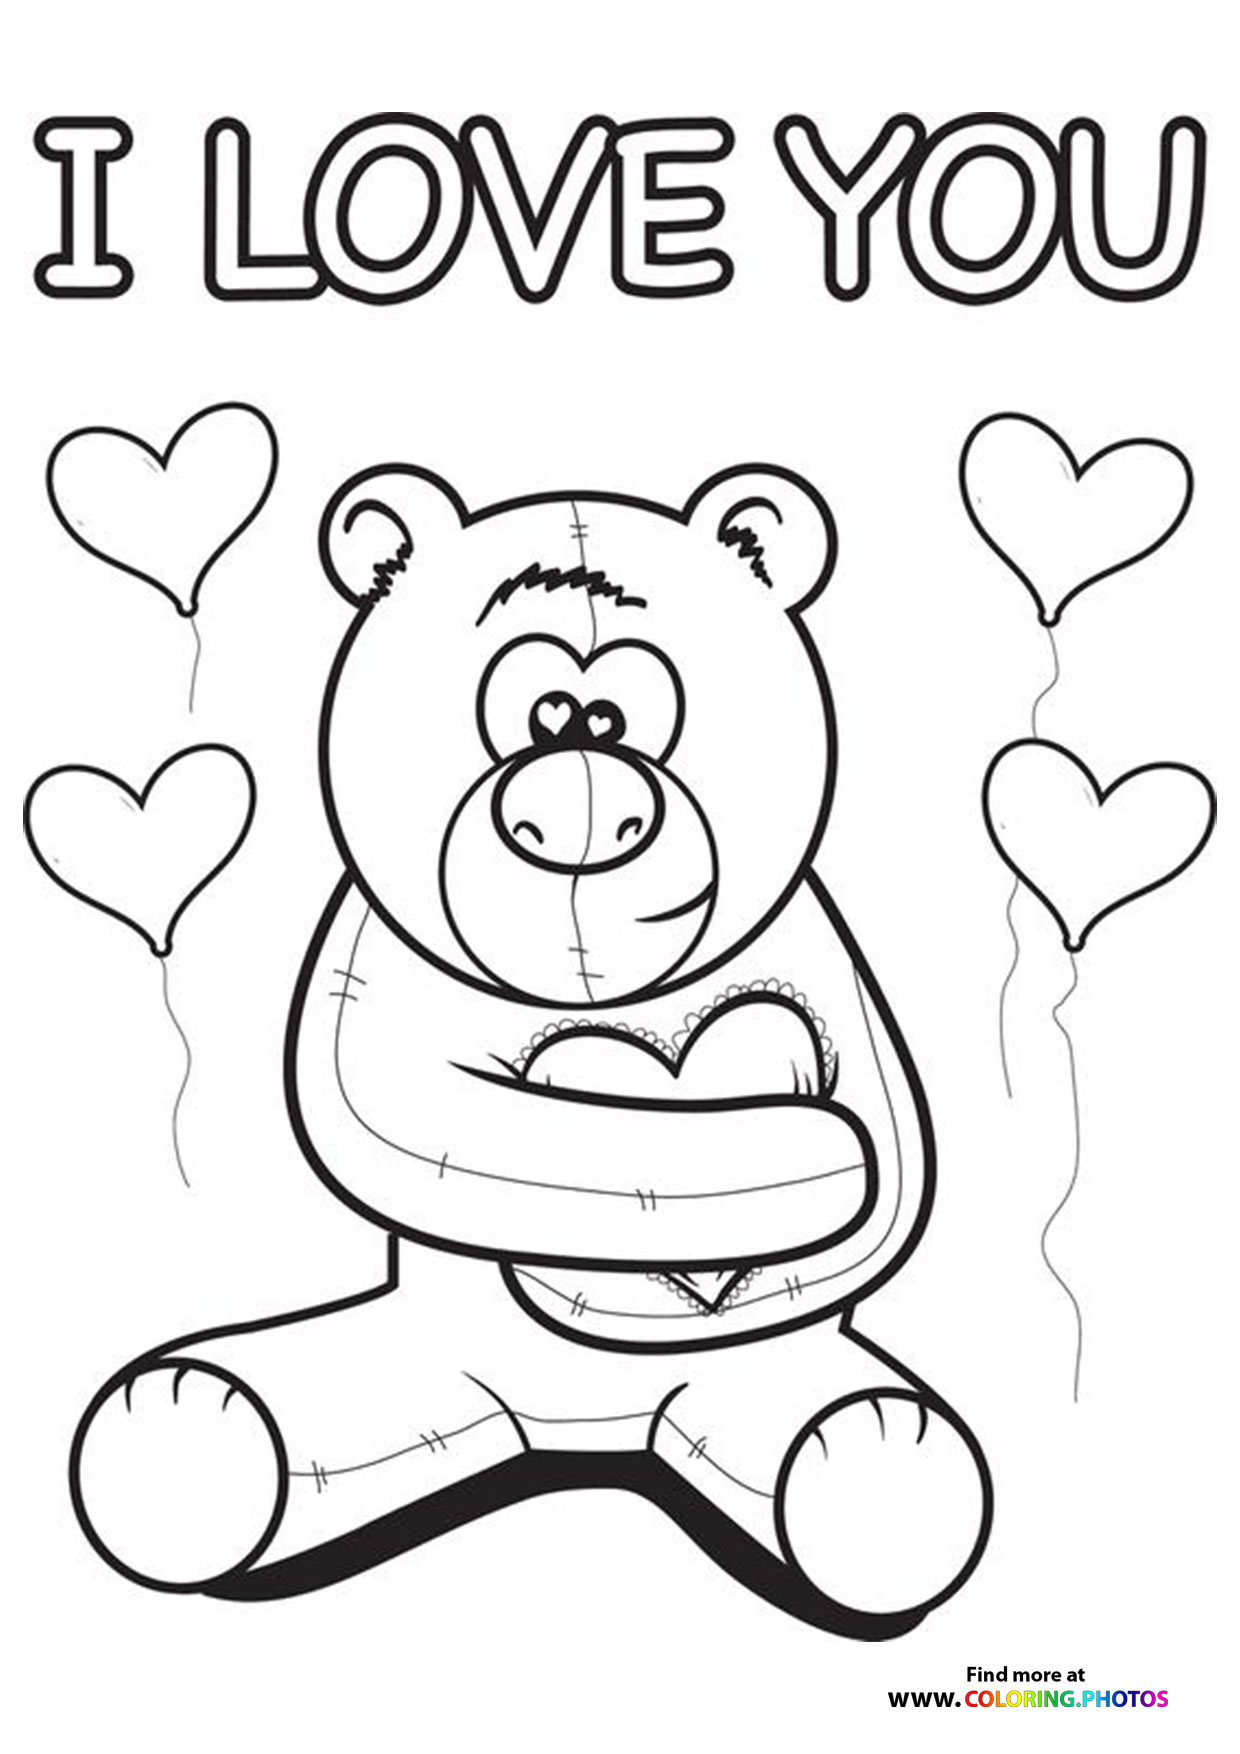 Teddy Bear Coloring Book Drawing for Kid Games by Nuttachai Reampayub